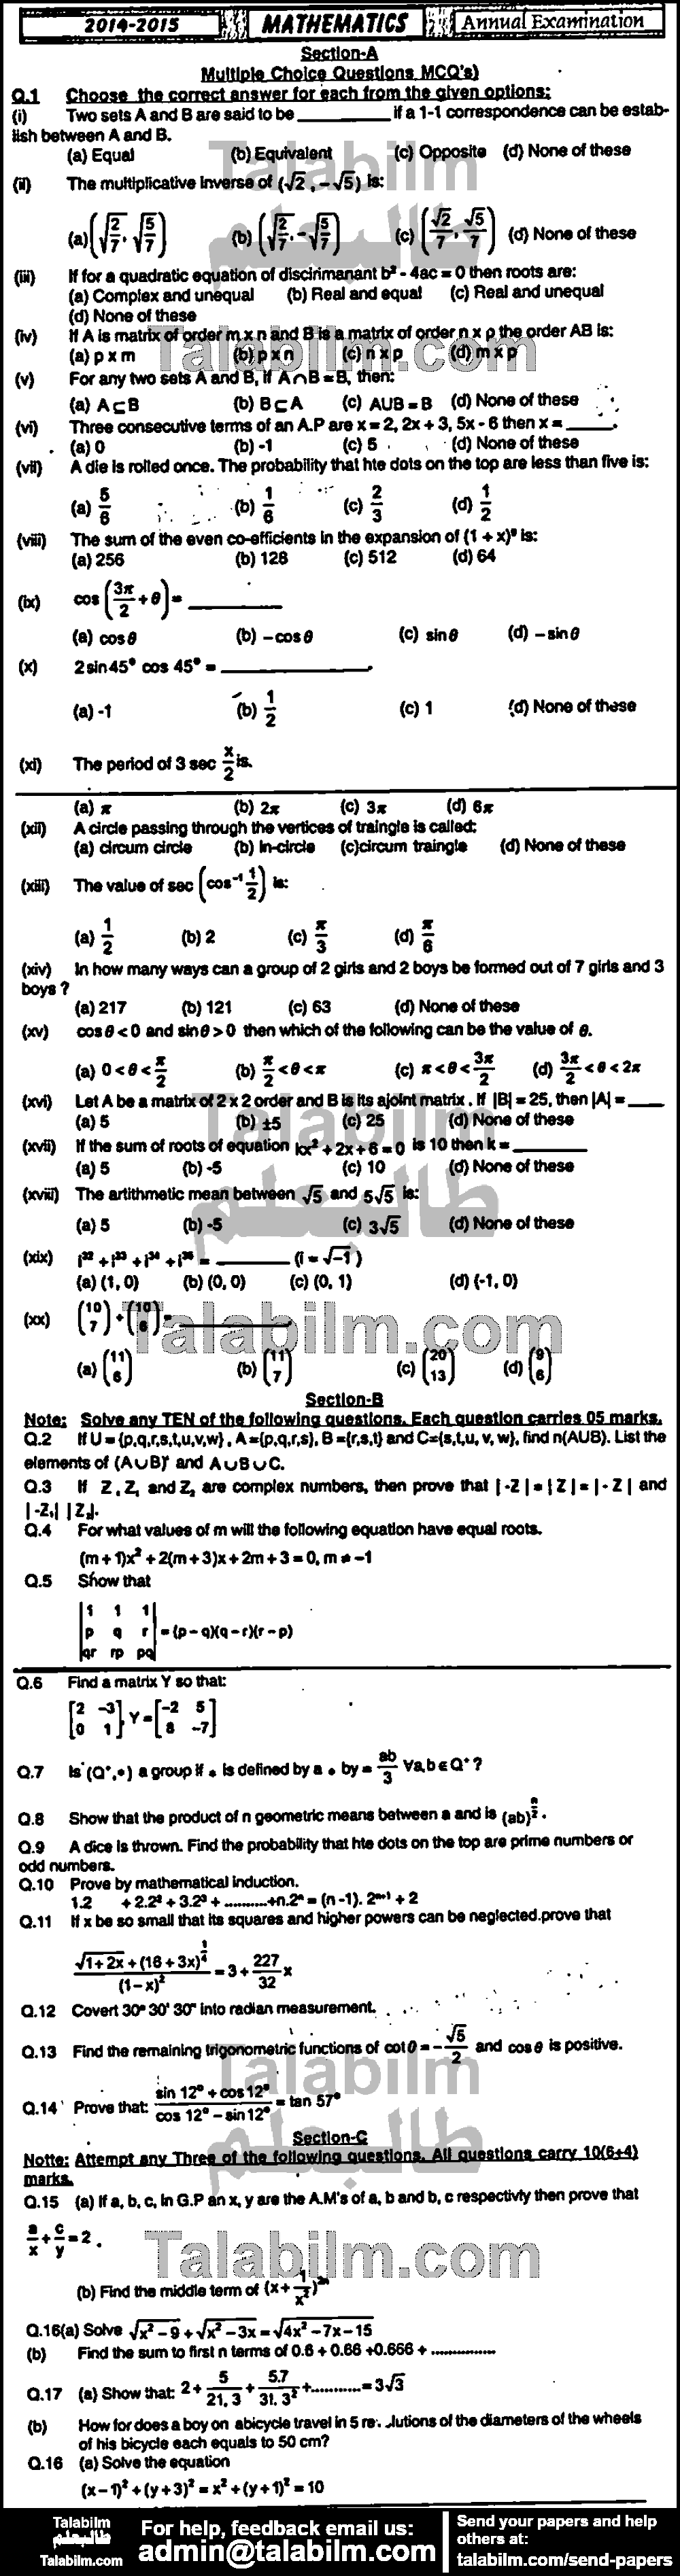 Math 0 past paper for Group-I 2015